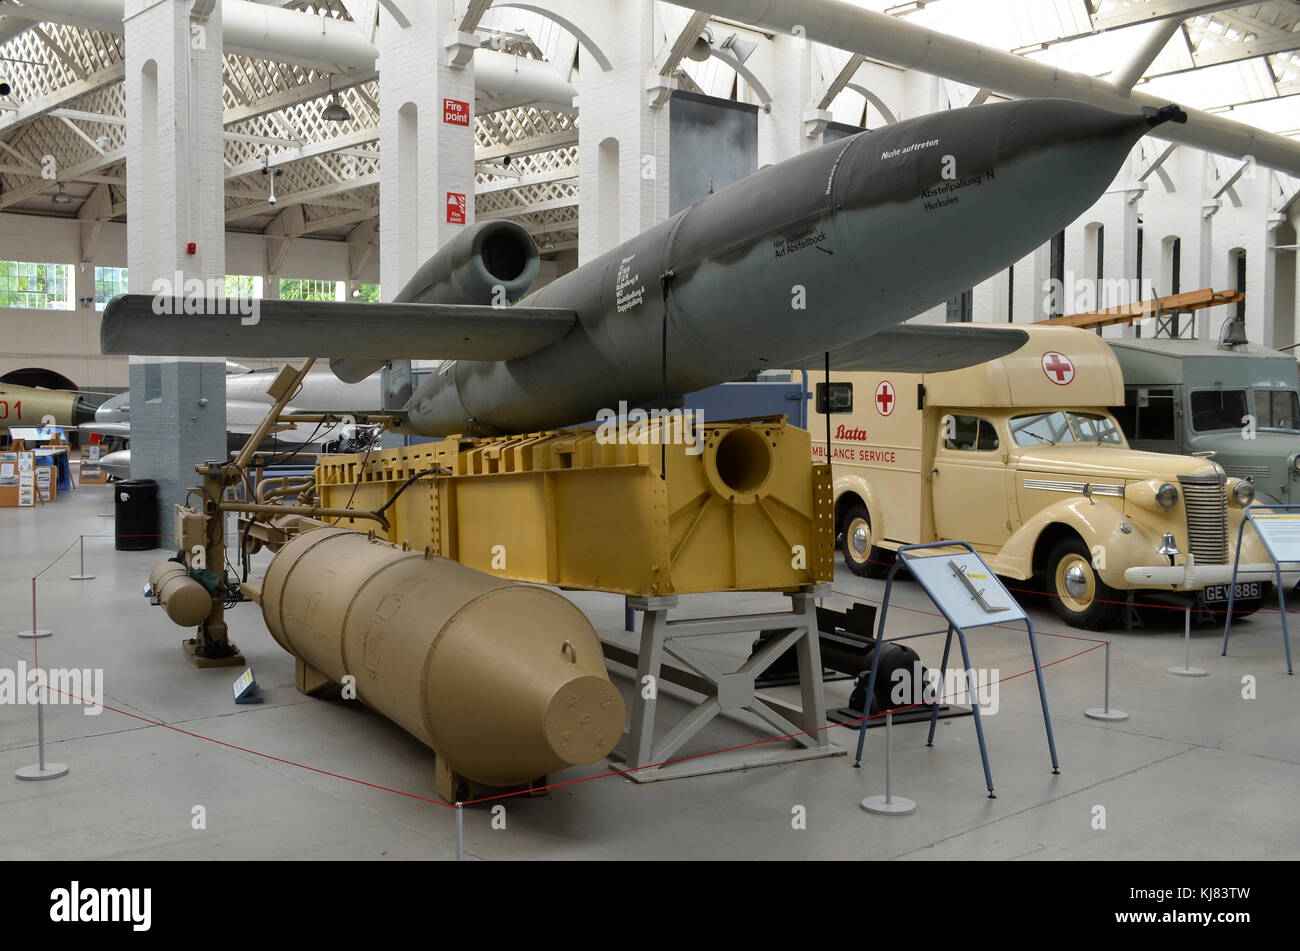 V-1 Flying Bomb with launch ramp, Duxford IWM, UK. The Fieseler Fi 103 or V-1 was also commonly known as the Doodlebug or the Buzz Bomb. Stock Photo